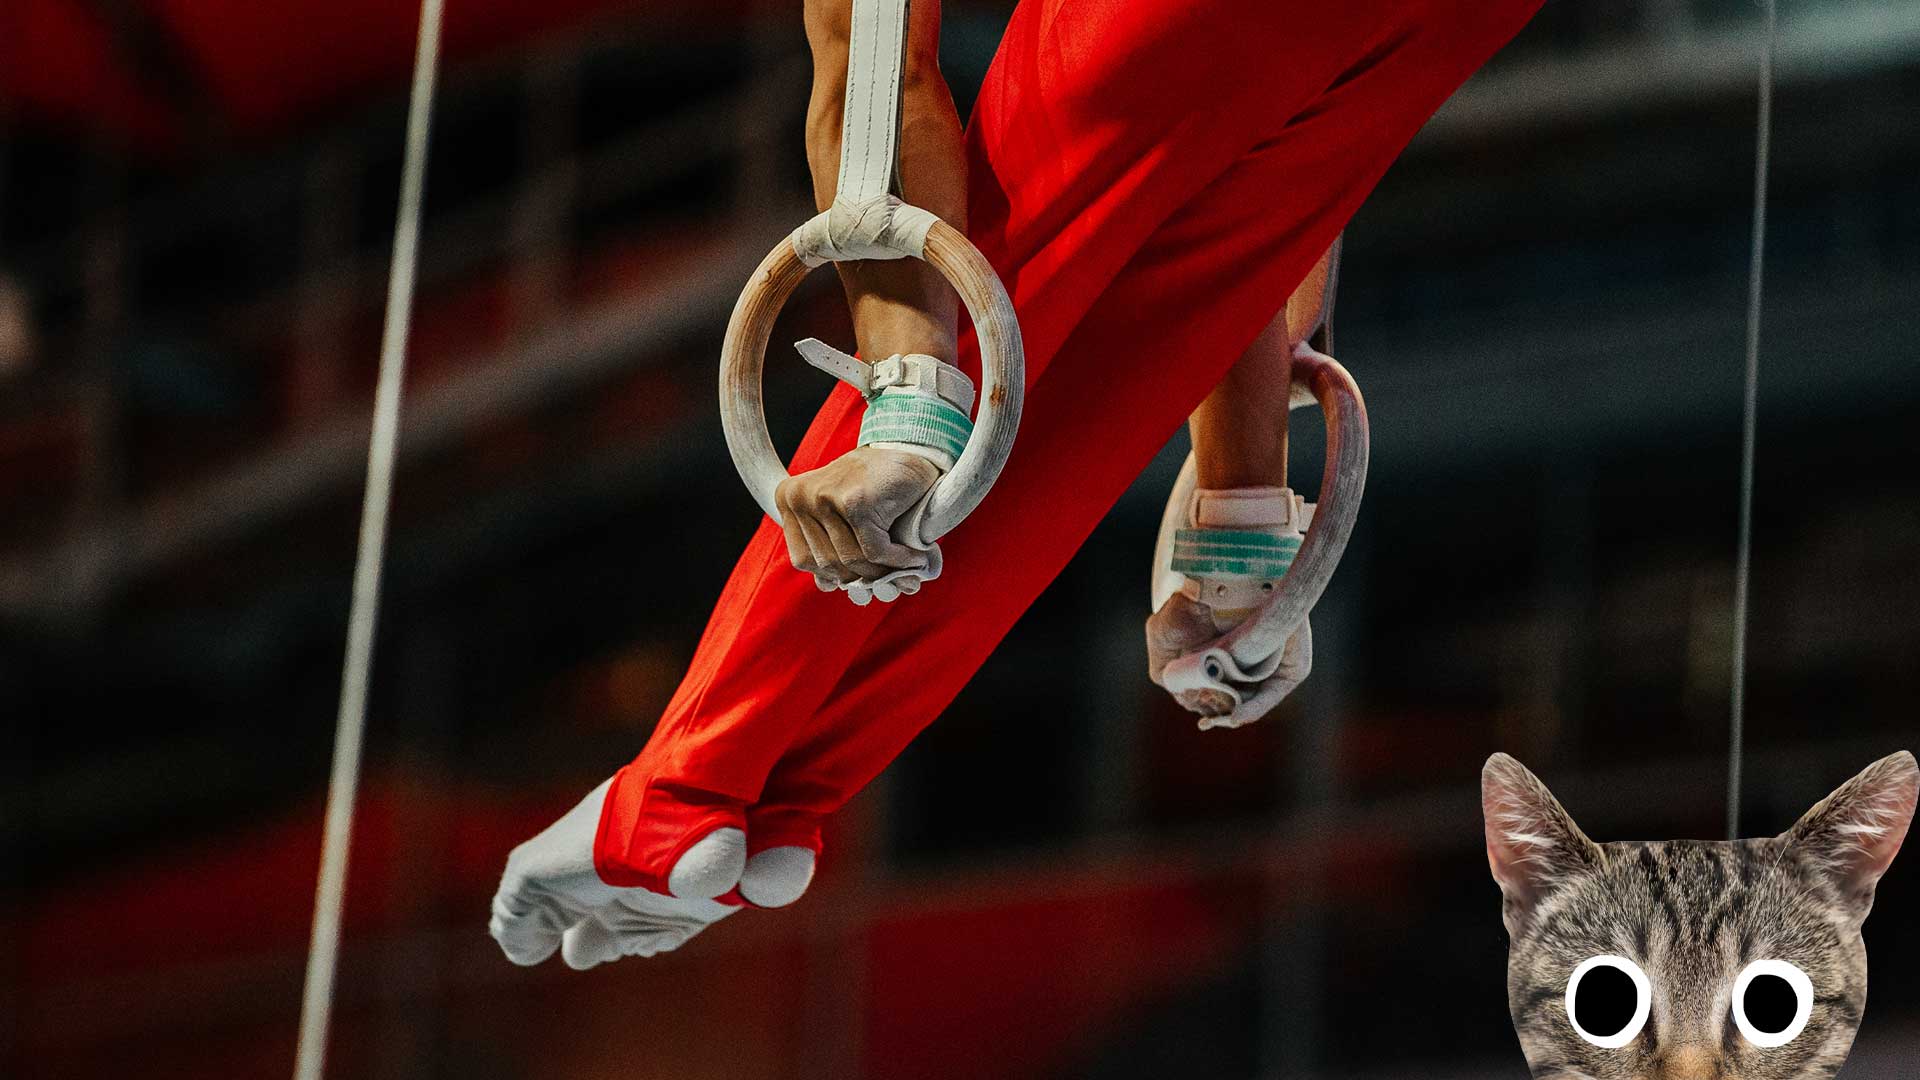 A gymnast on the still rings